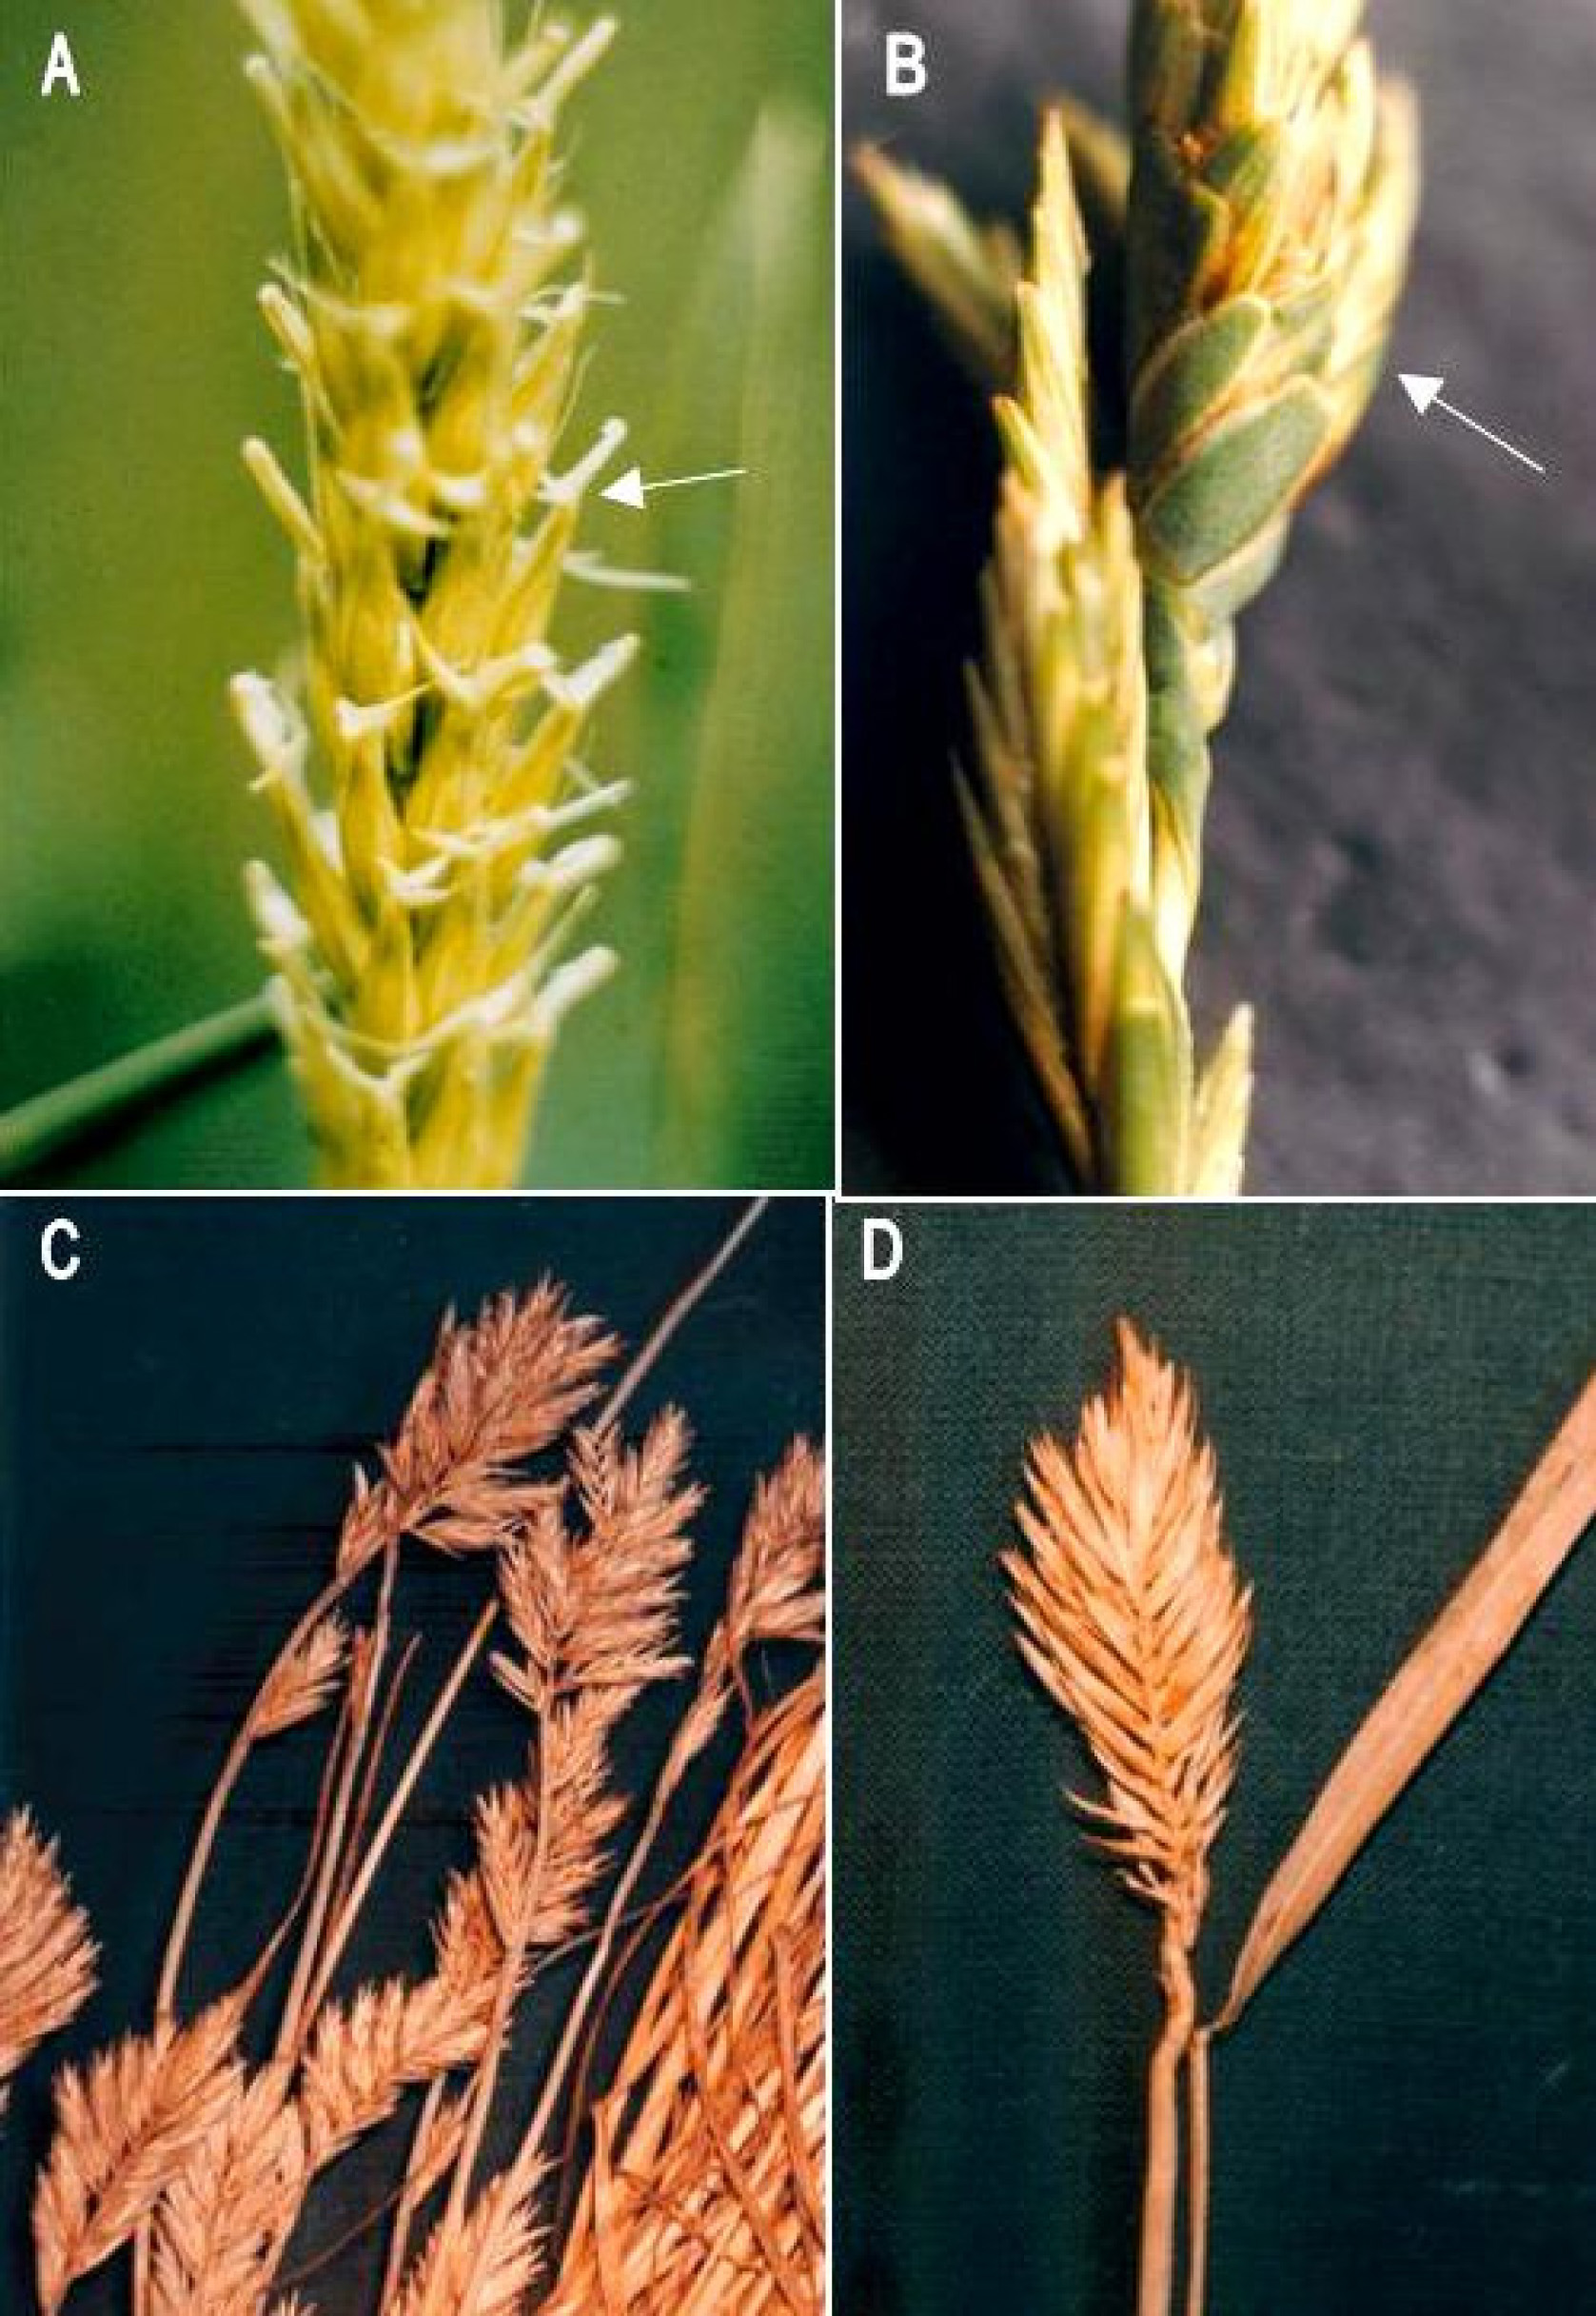 Fig. 1. Examples of grass mutants: A – a hooded barley; B – a spiro-distichous form of Lophopyrum elongatum; C – Lolium perenne with compact ears; D – a glumeless and compact form of Agropyron pectiniforme.